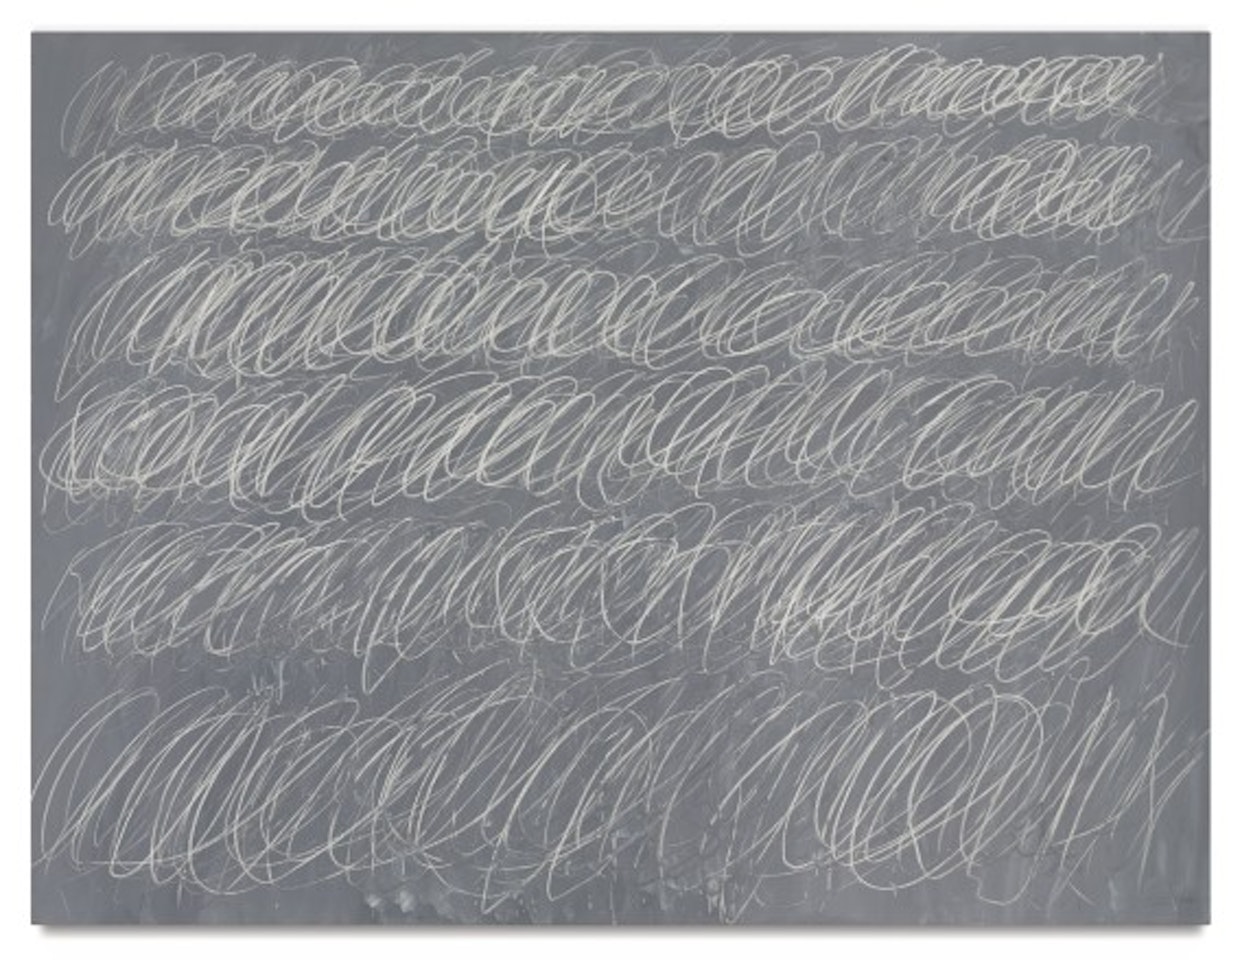 UNTITLED (NEW YORK CITY) by Cy Twombly